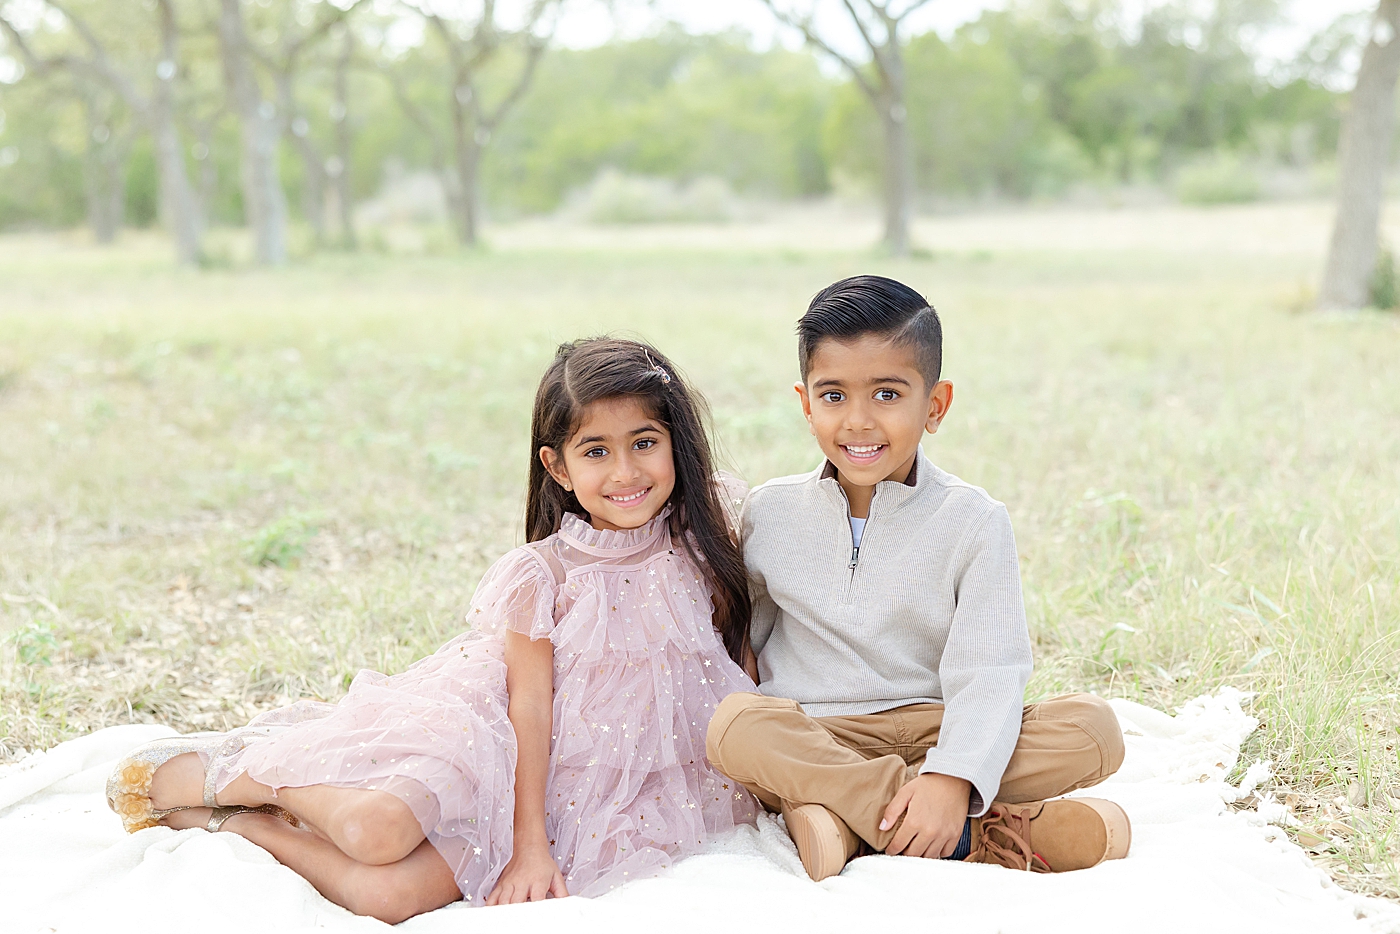 Little boy and girl sitting on a blanket during their Field Family Session | Image by Sana Ahmed Photography